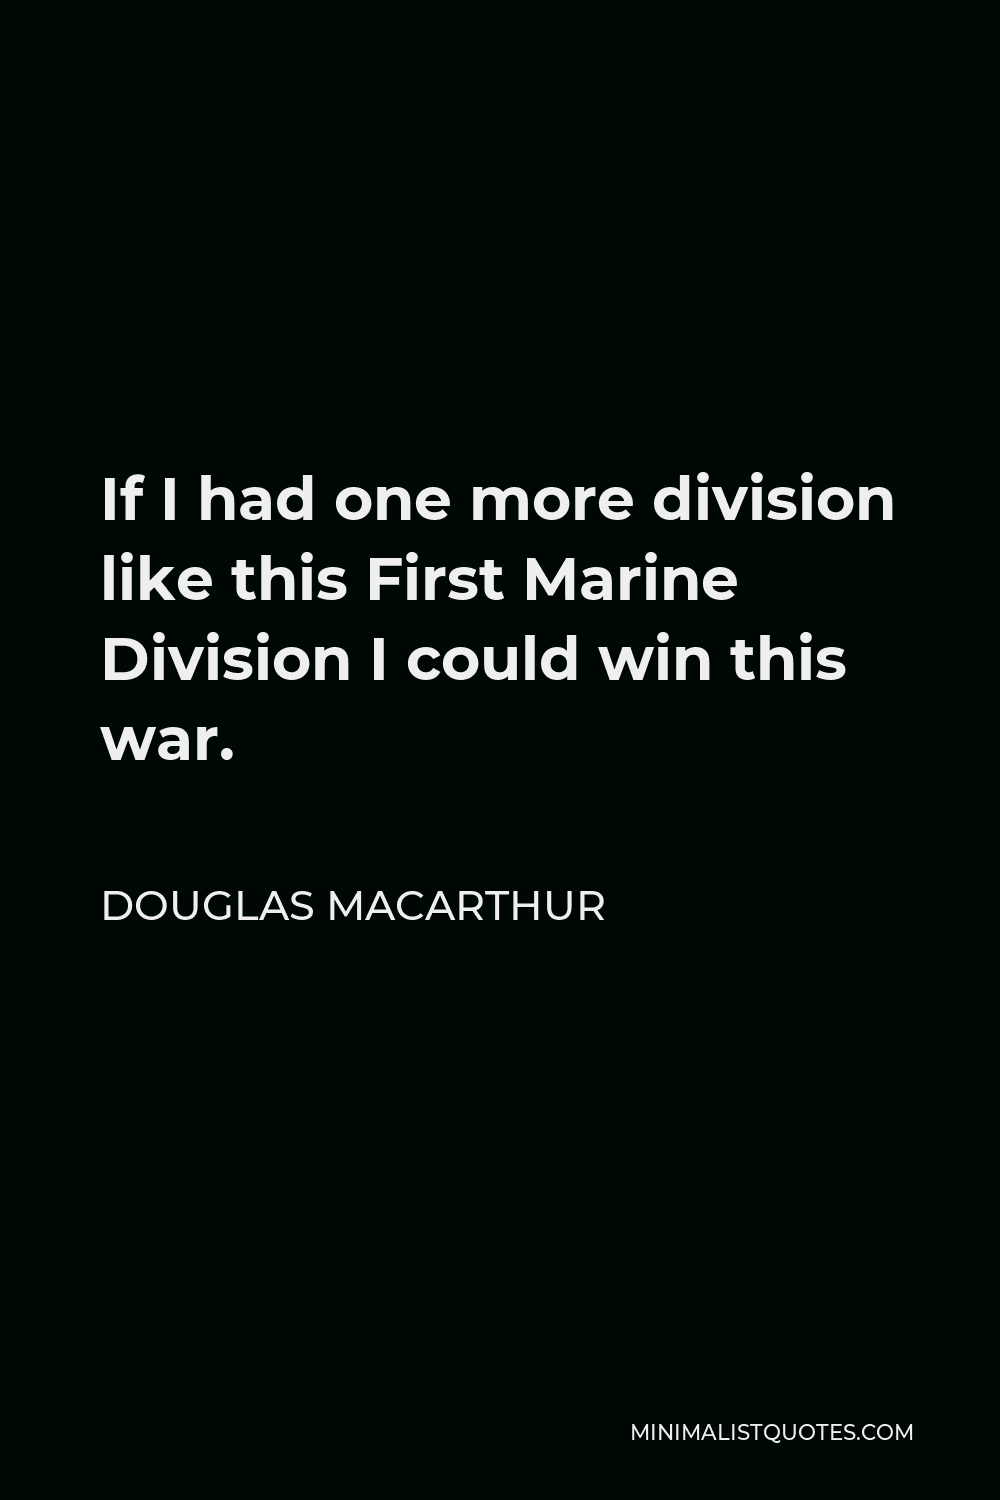 Douglas MacArthur Quote - If I had one more division like this First Marine Division I could win this war.